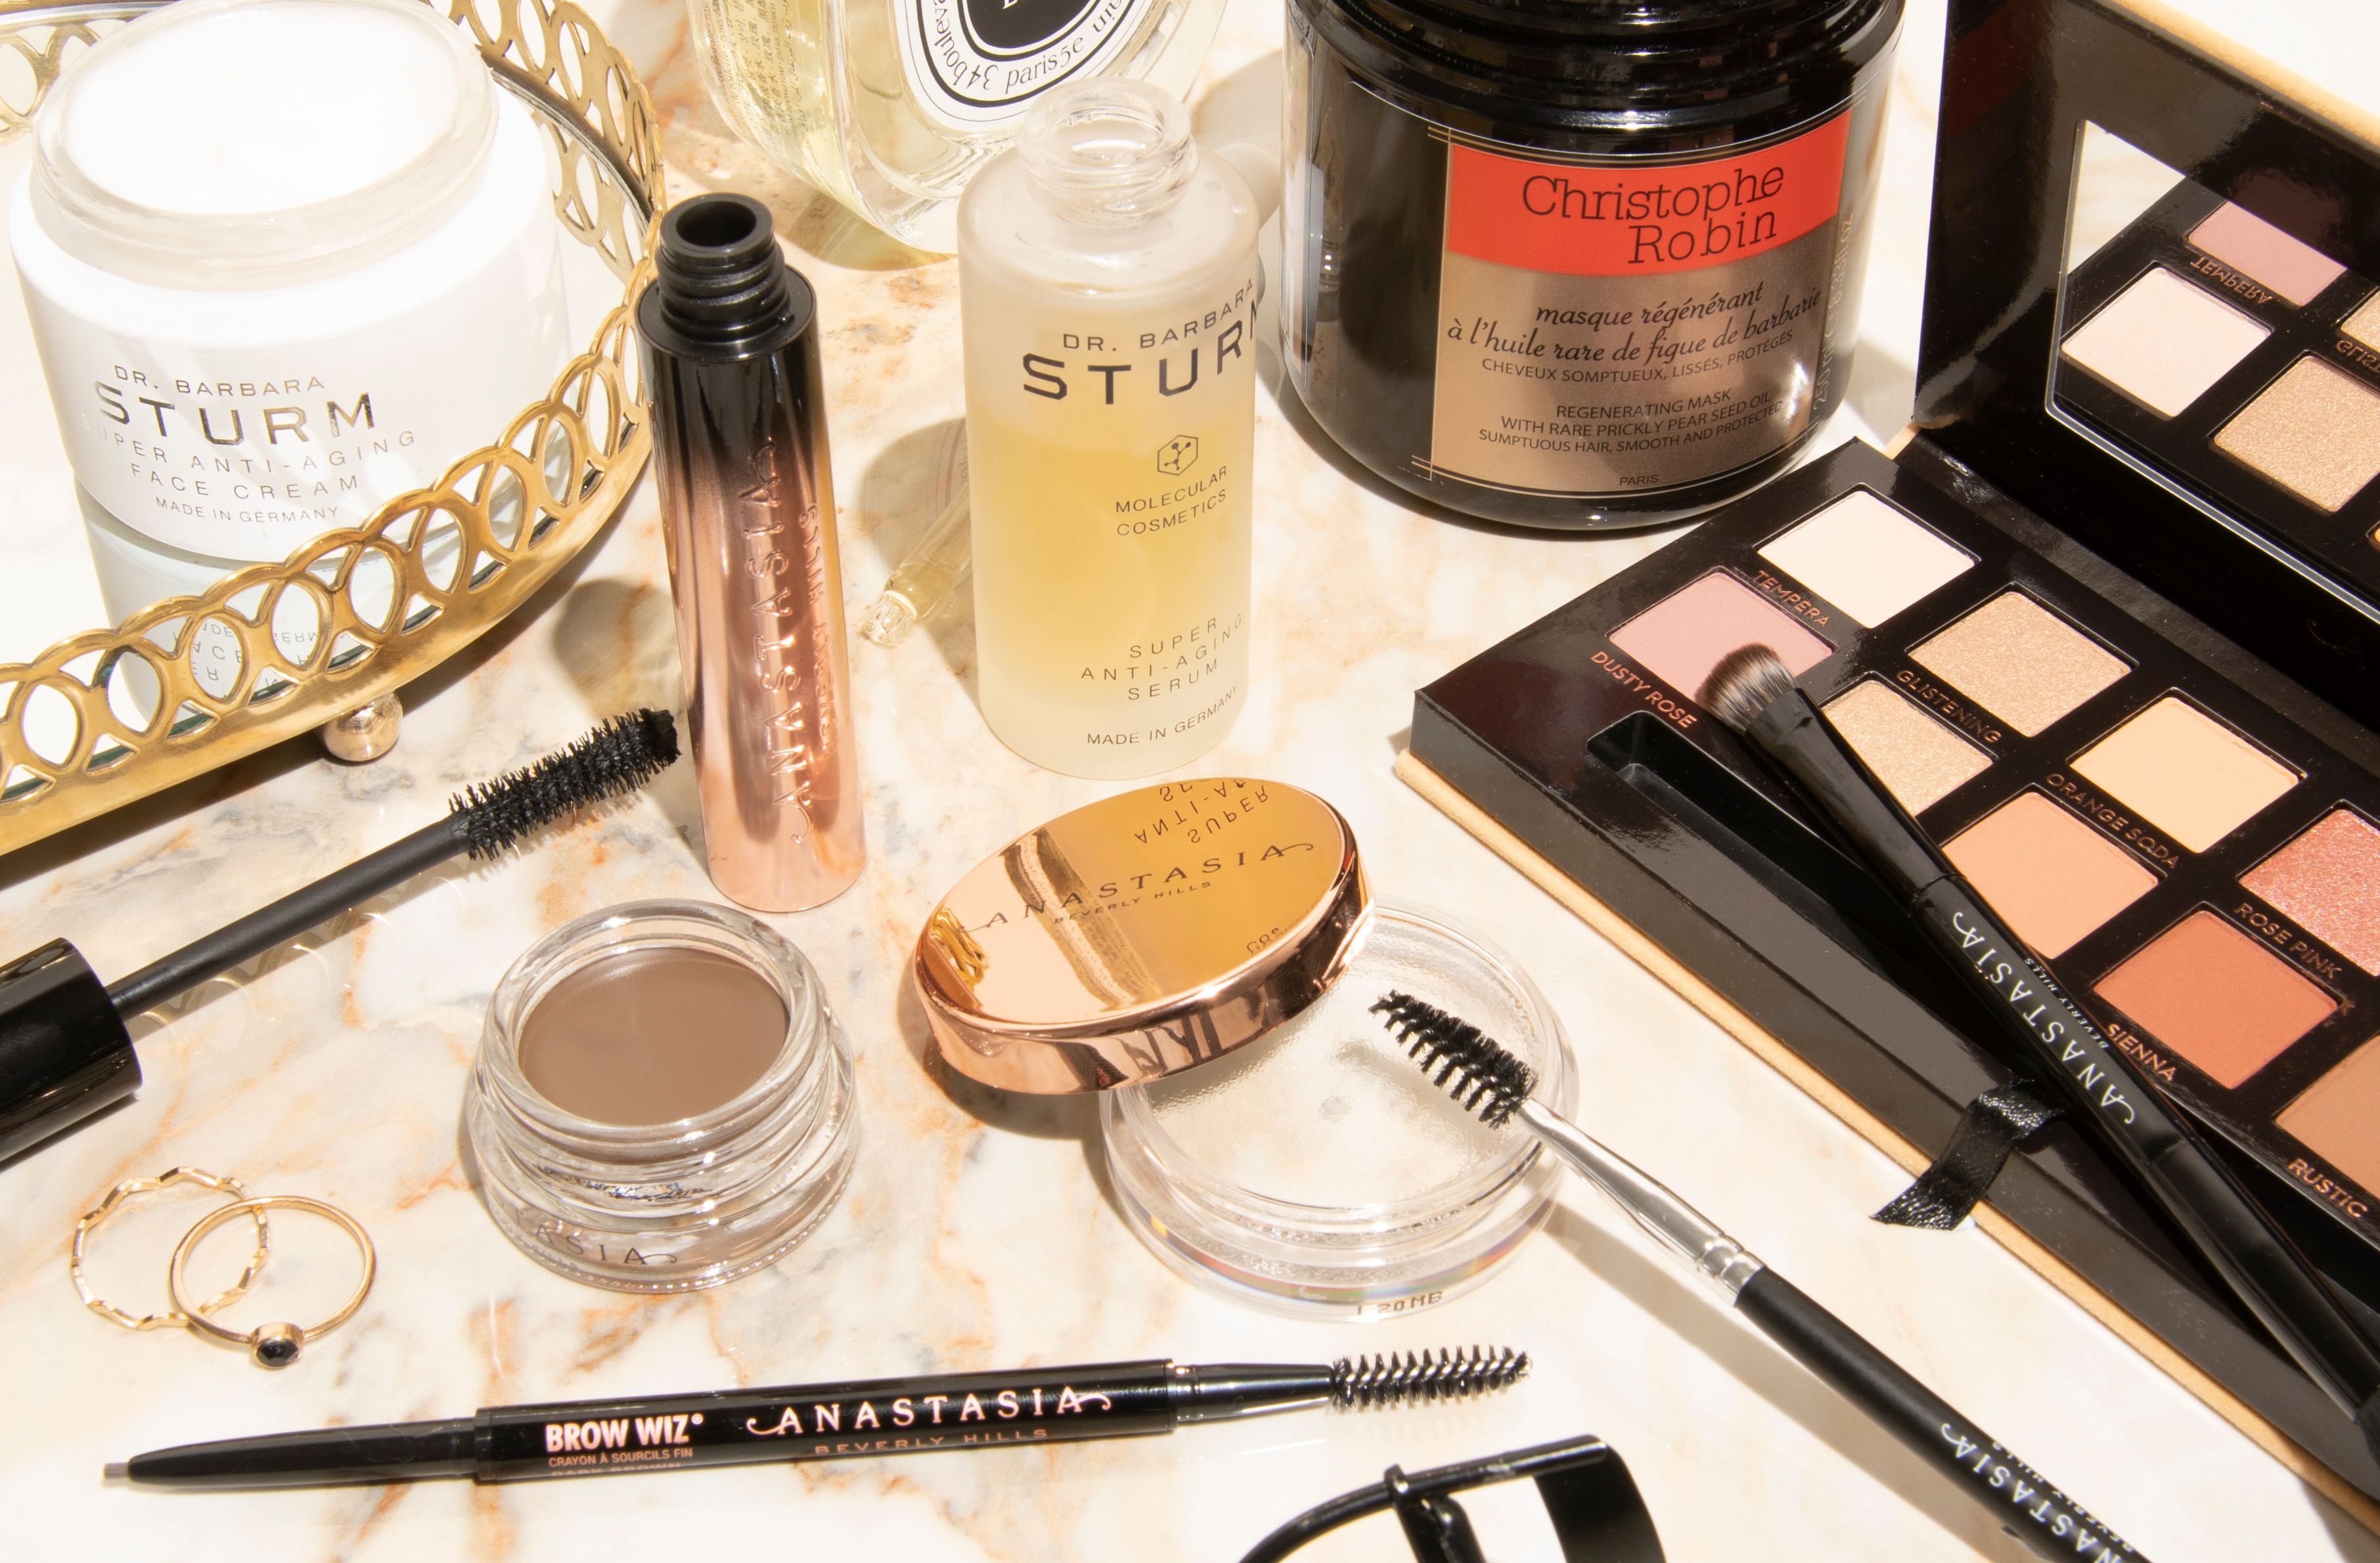 Anastasia Soare On How To Glam-Up Your Makeup